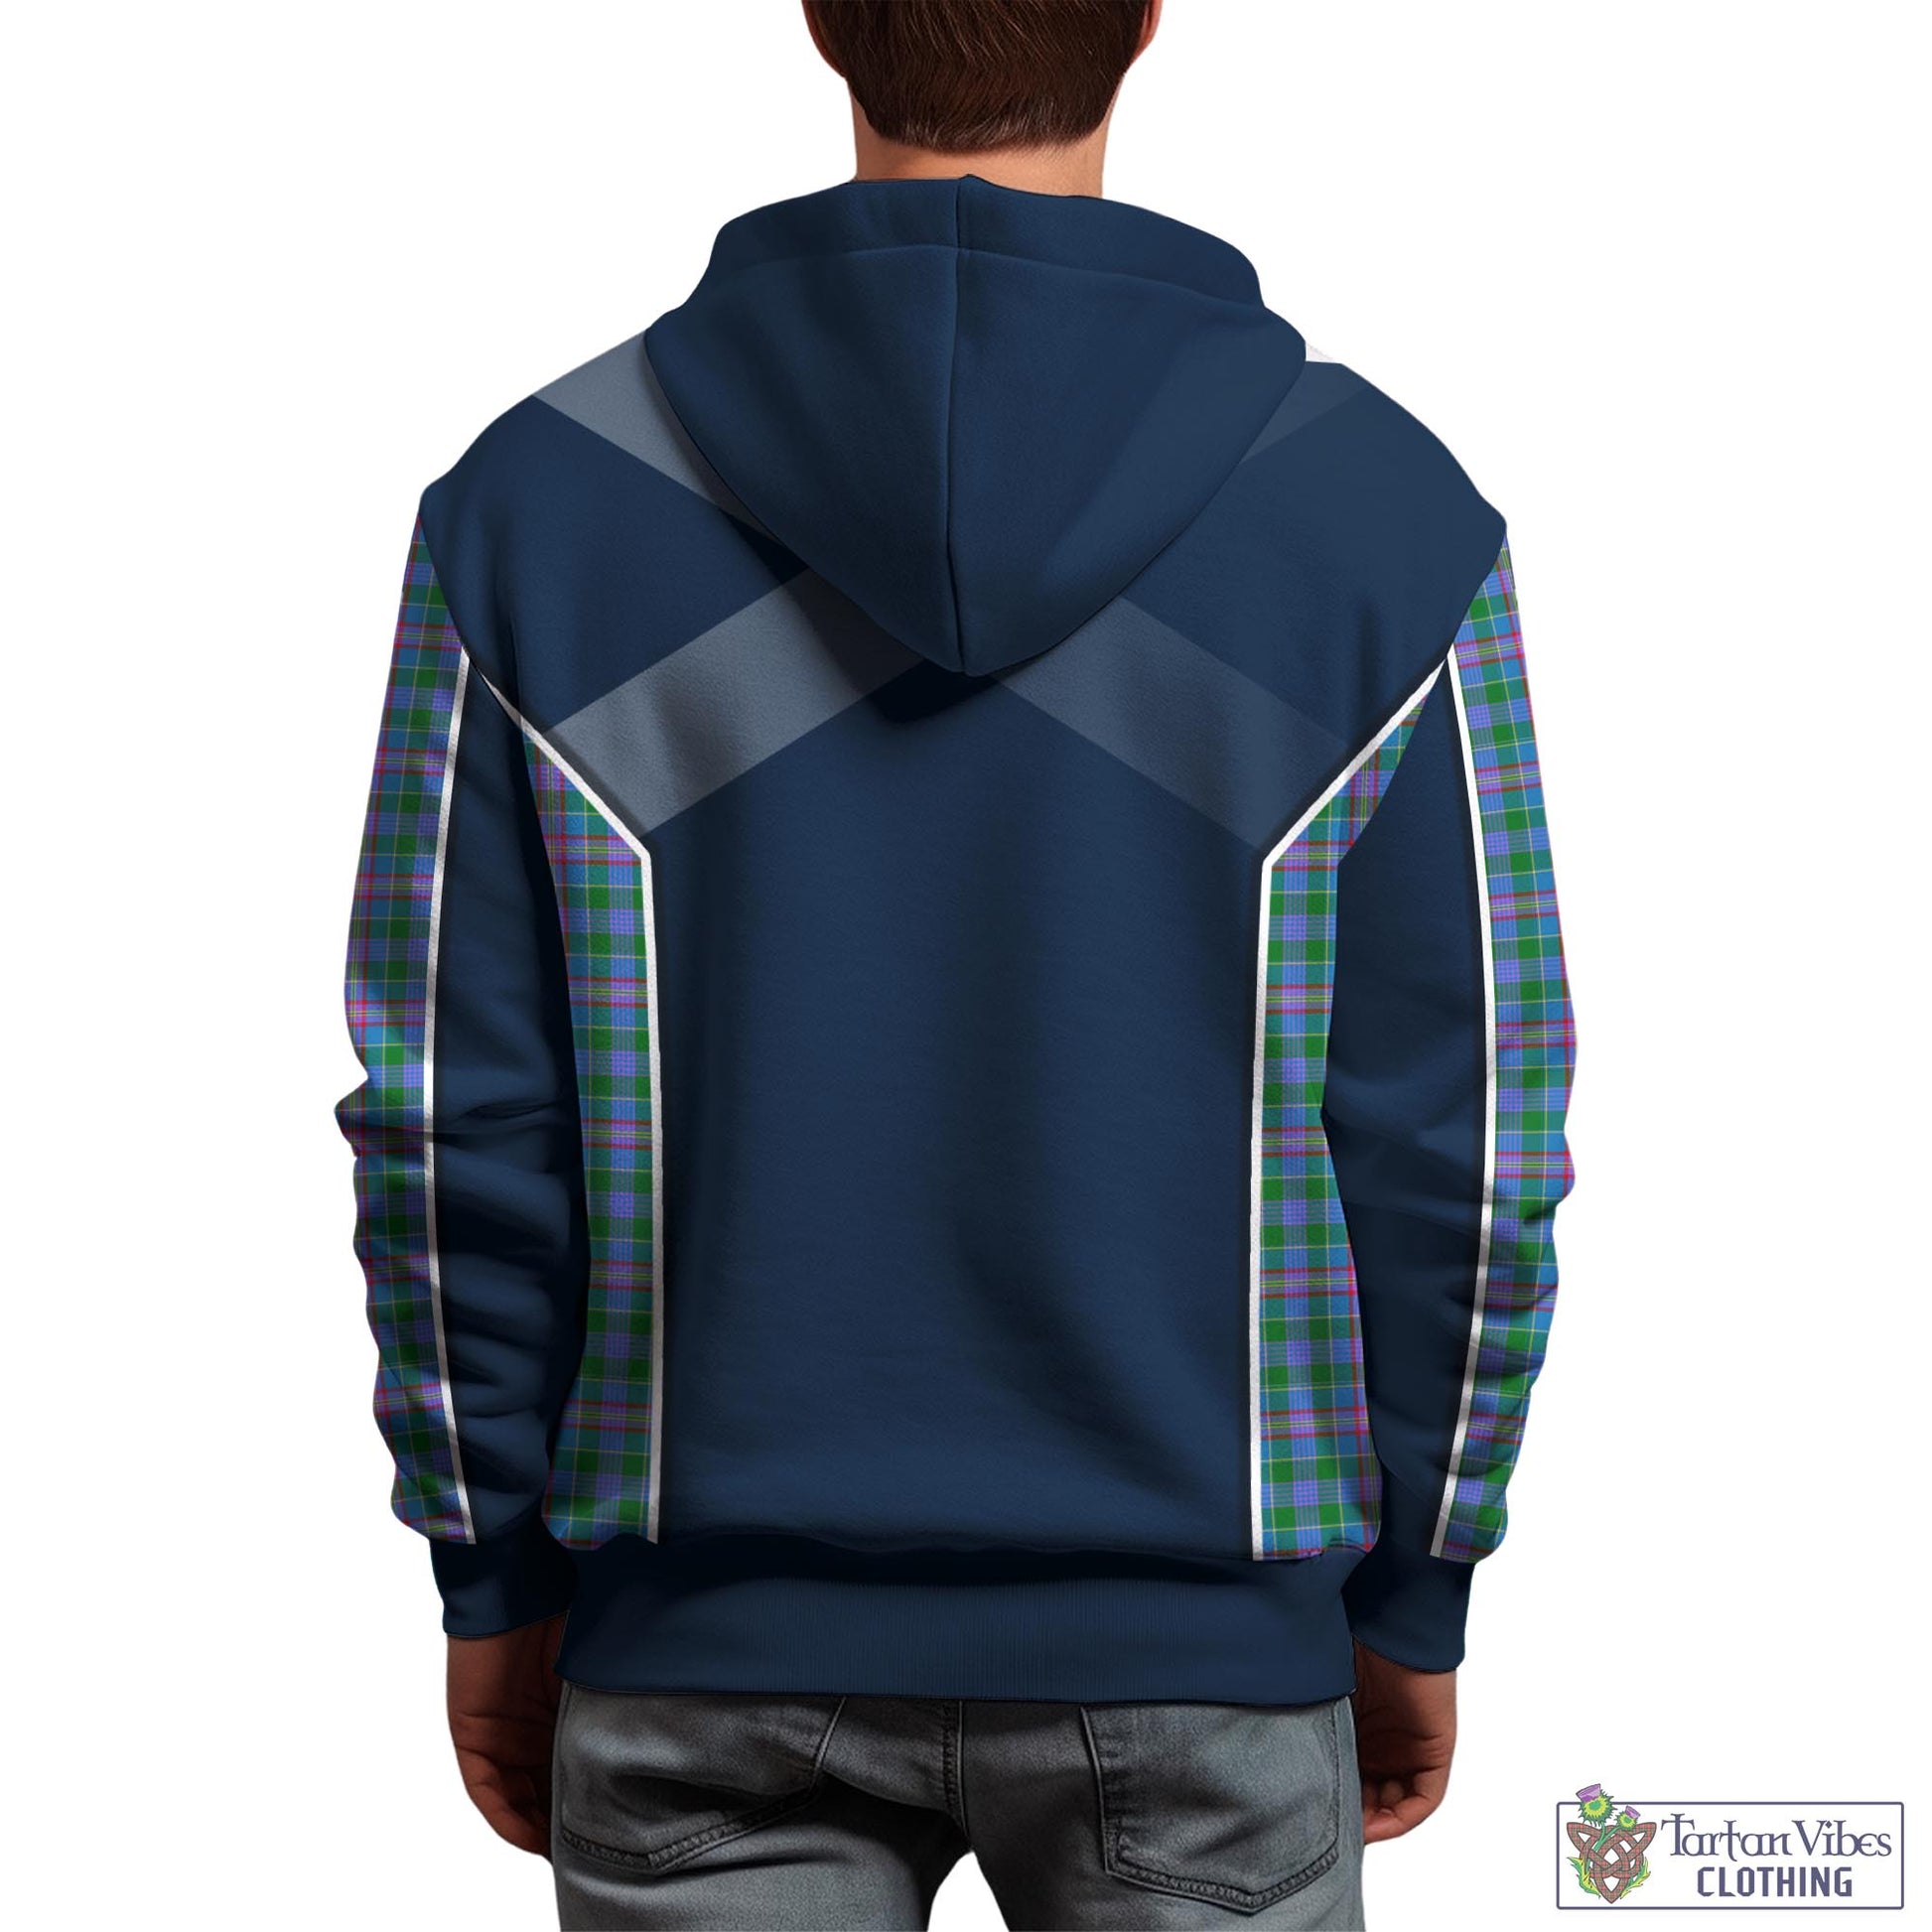 Tartan Vibes Clothing Pitcairn Hunting Tartan Hoodie with Family Crest and Scottish Thistle Vibes Sport Style